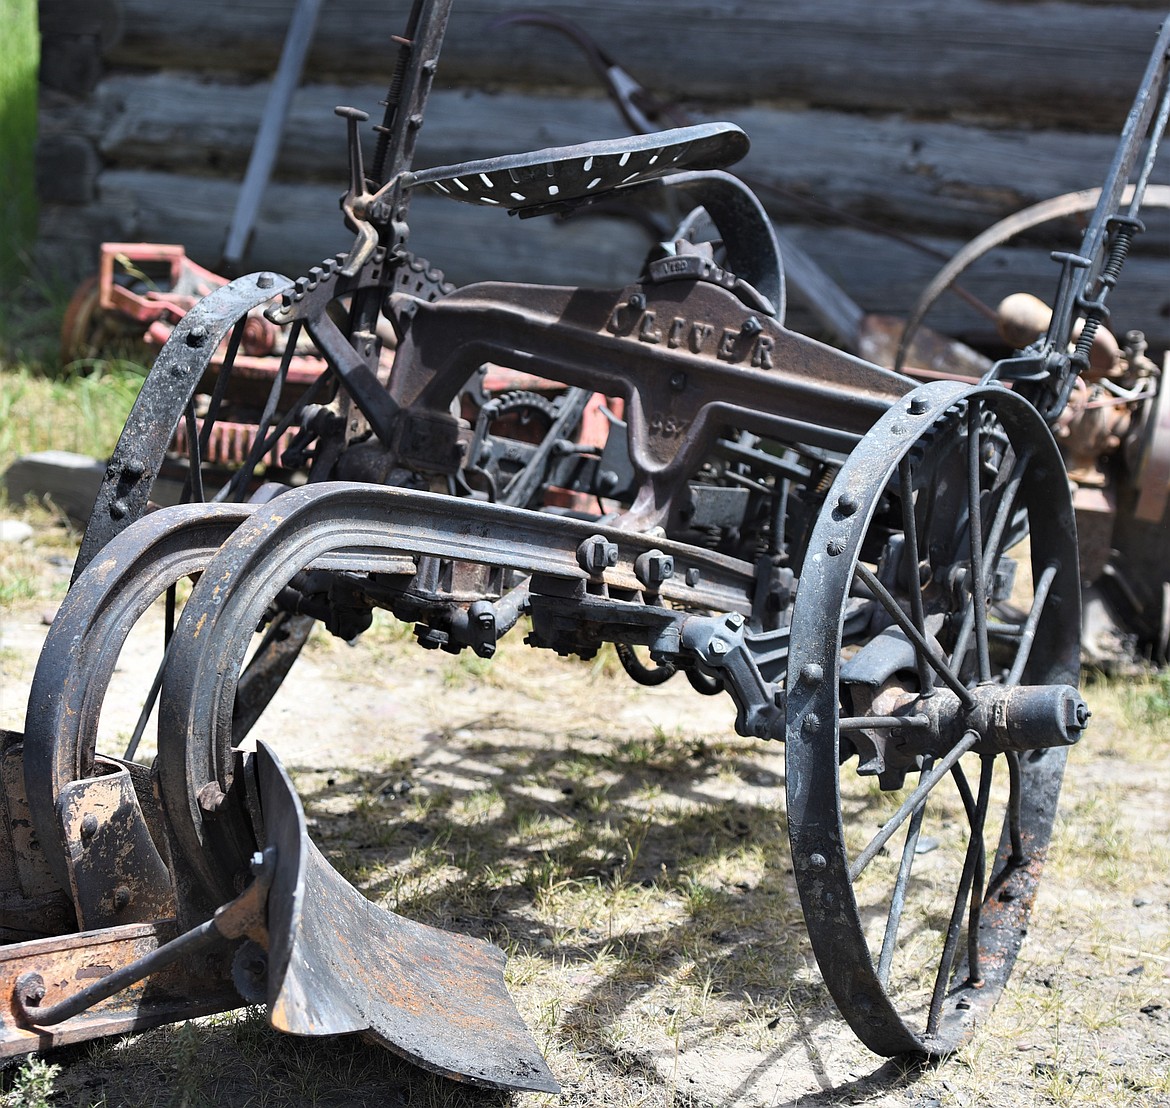 Some pieces, like this Oliver plow that sat unused for years on Wild Horse Island, sustained severe damage. The heat from the fire twisted and bent some metal parts. (Scot Heisel/Lake County Leader)